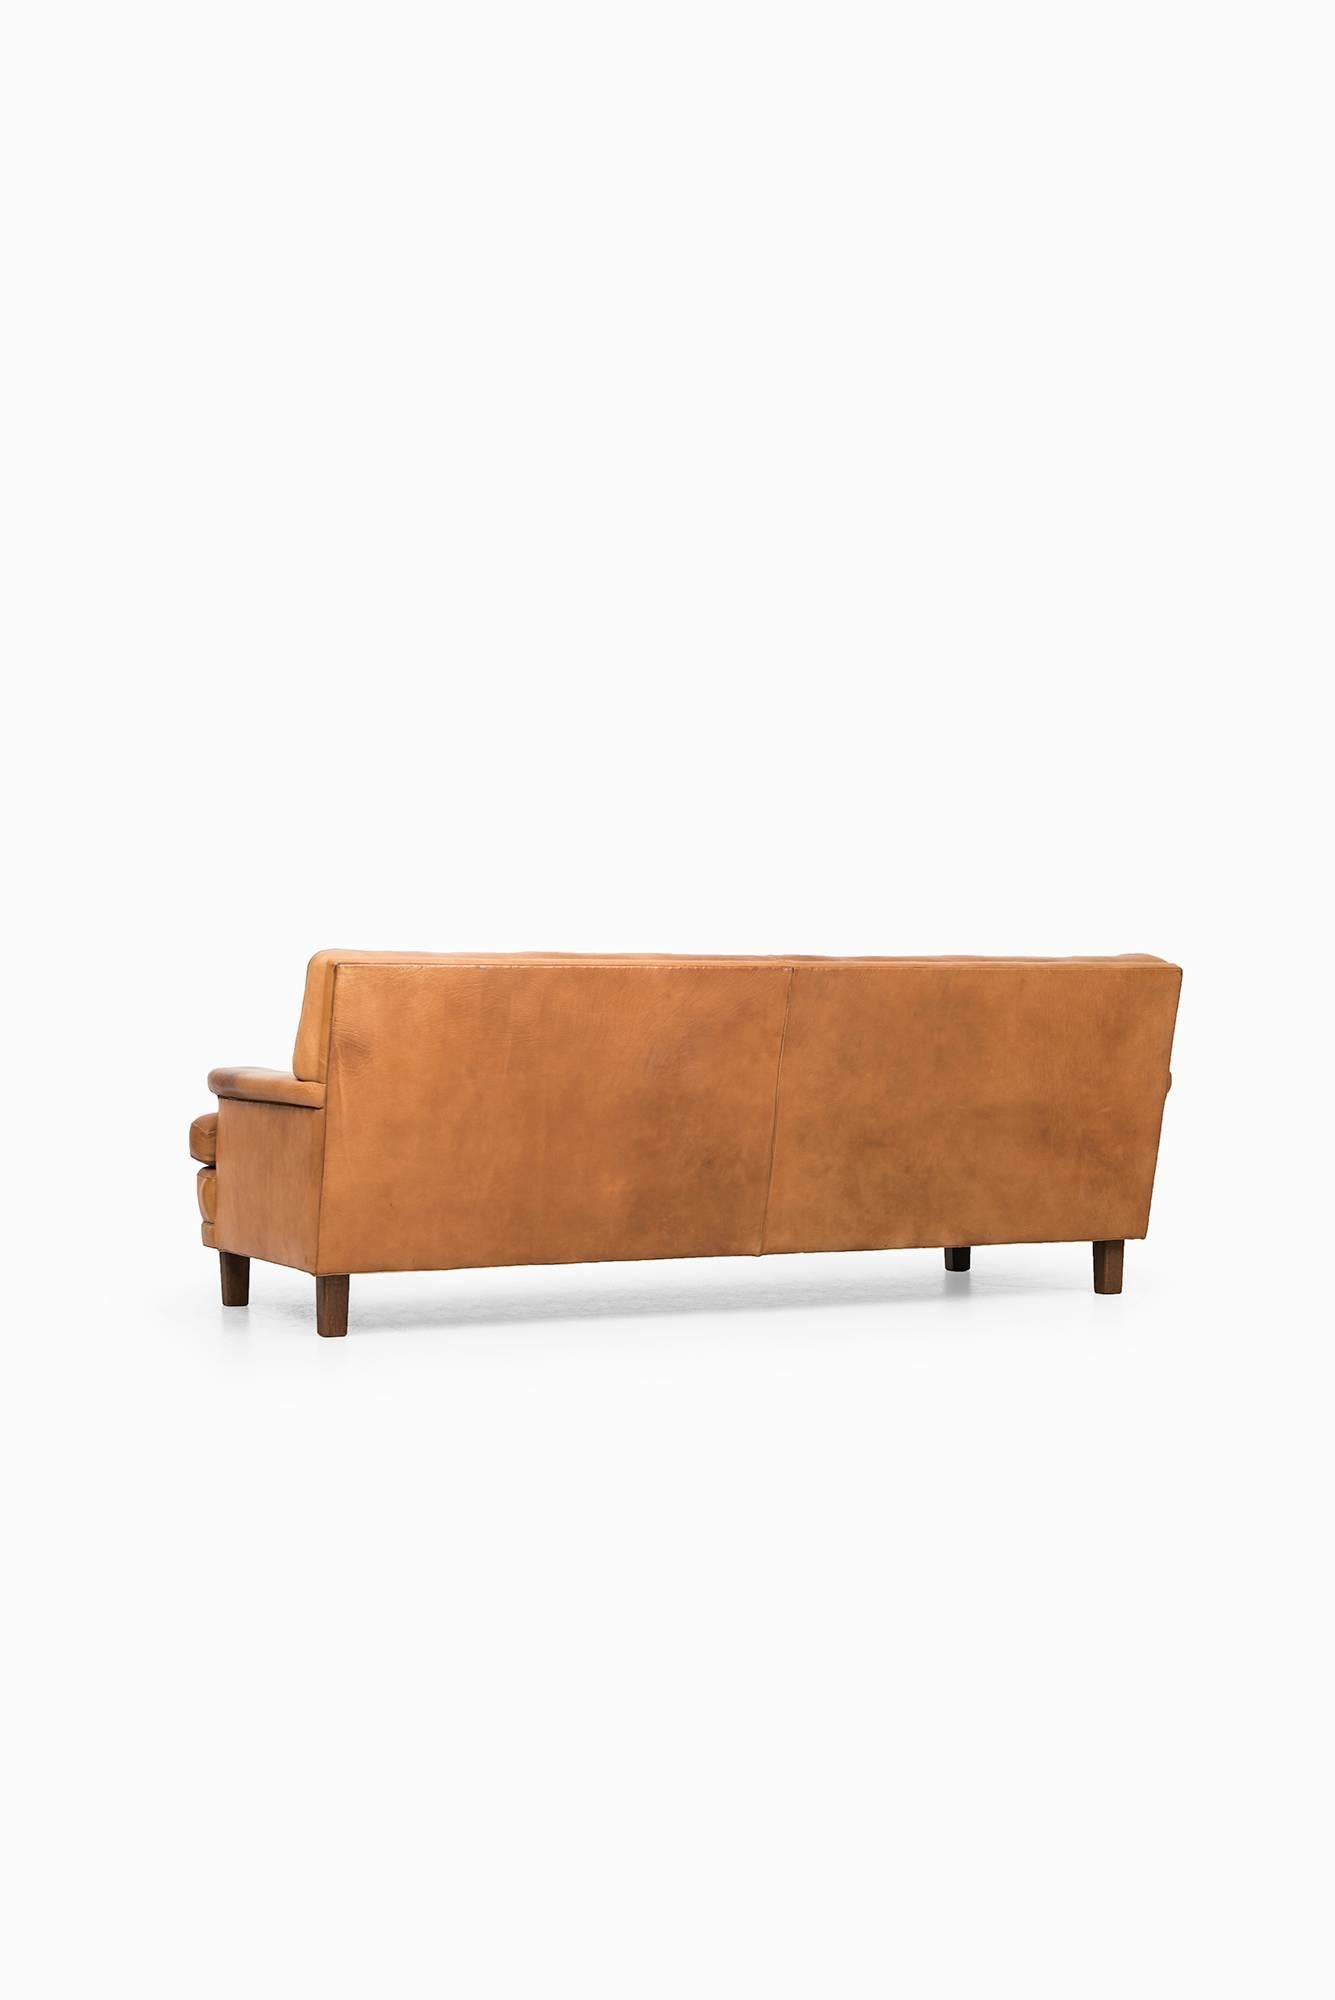 Mid-20th Century Arne Norell Merkur sofa in cognac brown leather by Norell AB in Sweden